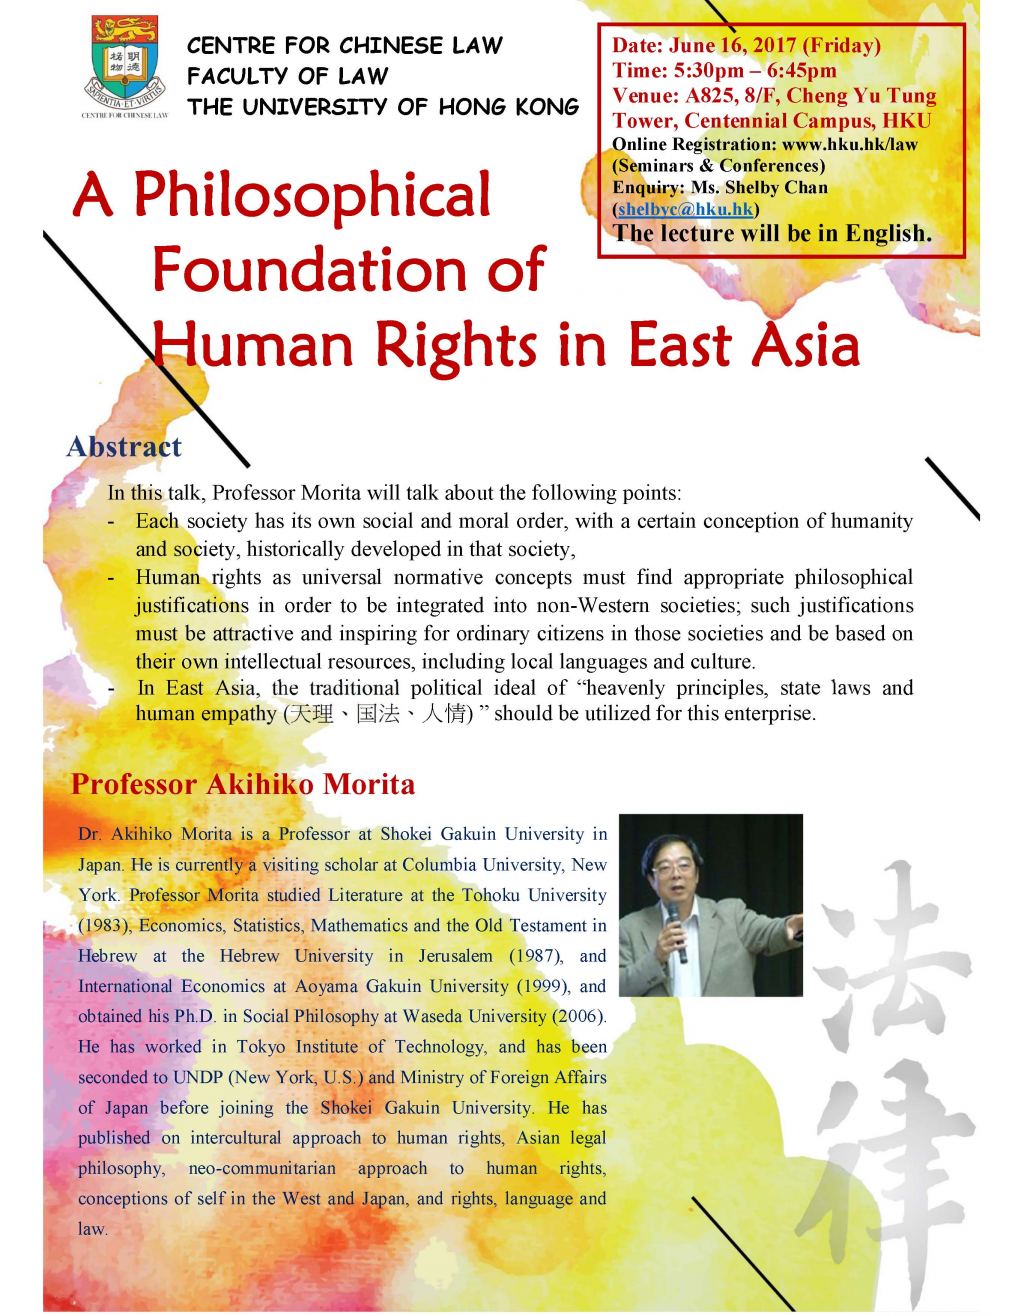 A philosophical foundation of human rights in East Asia